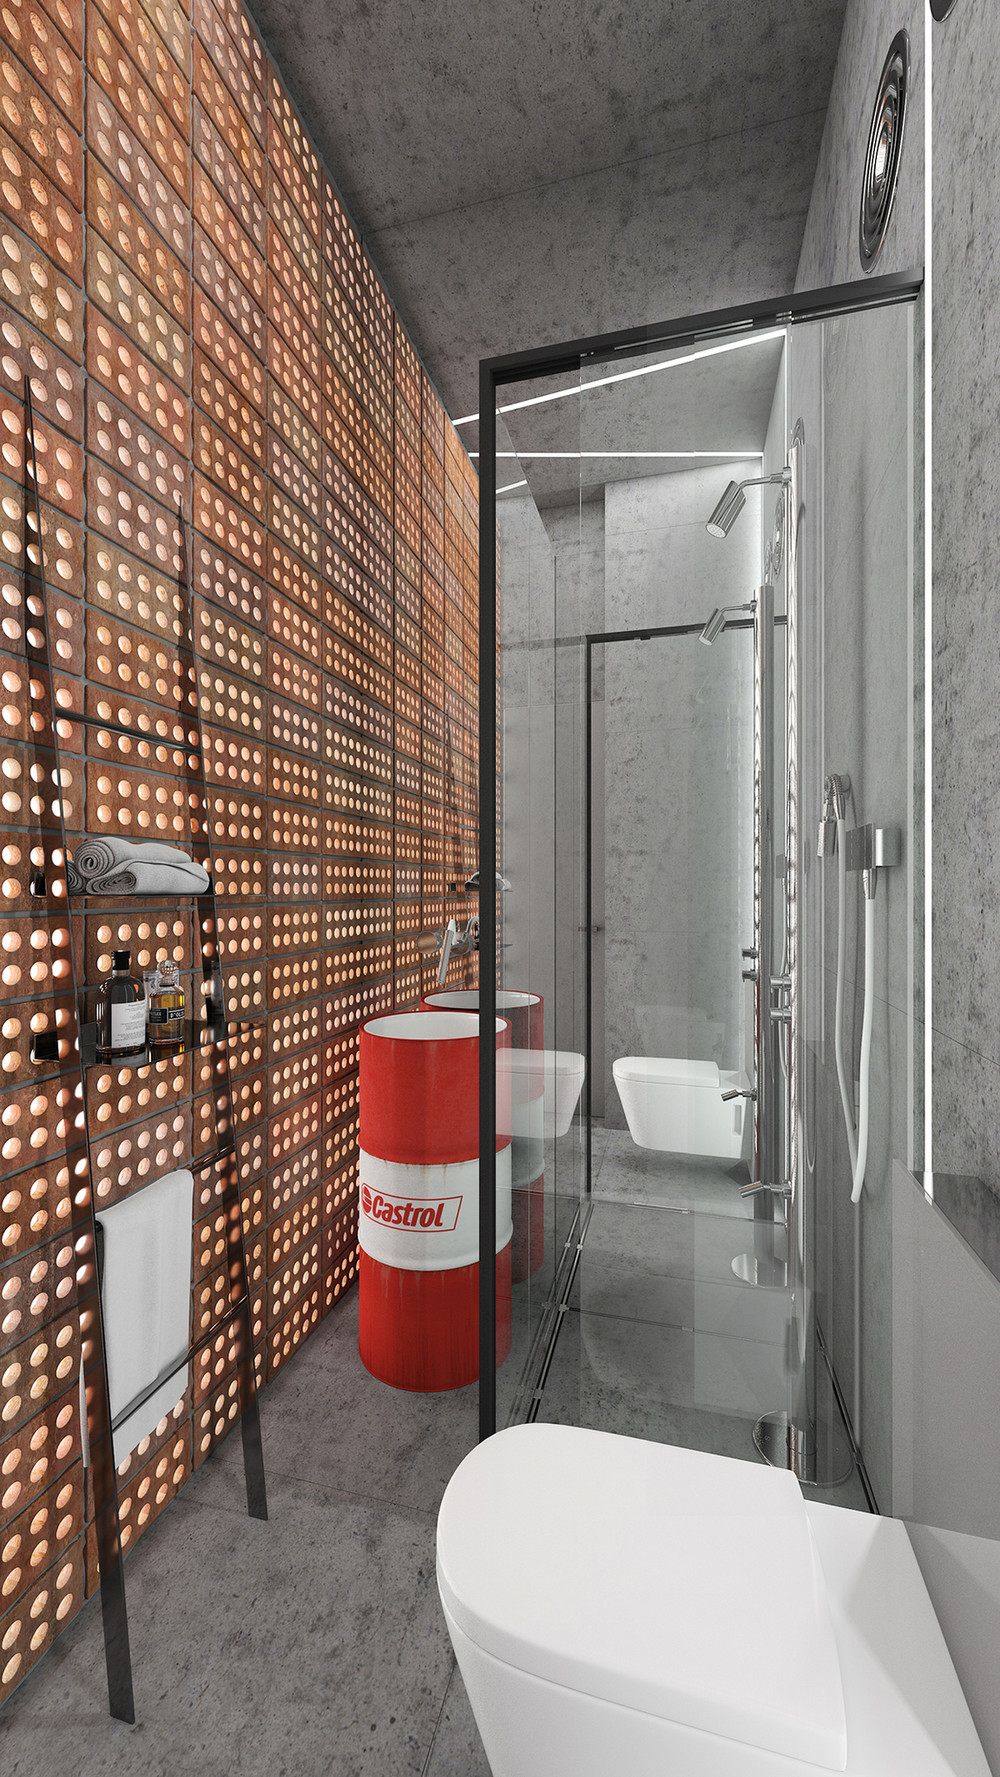 Wall structure for minimalist design "width =" 1000 "height =" 1777 "srcset =" https://mileray.com/wp-content/uploads/2020/05/1588516417_780_Minimalist-Bathroom-Designs-With-Wall-Texture-Decor-Which-Looks-So.jpg 1000w, https: // myfashionos .com / wp-content / uploads / 2016/09 / Mezhevova-Dean-1-169x300.jpg 169w, https://mileray.com/wp-content/uploads/2016/09/Mezhevova-Dean-1-768x1365. jpg 768w, https://mileray.com/wp-content/uploads/2016/09/Mezhevova-Dean-1-576x1024.jpg 576w, https://mileray.com/wp-content/uploads/2016/09 / Mezhevova-Dean-1-696x1237.jpg 696w, https://mileray.com/wp-content/uploads/2016/09/Mezhevova-Dean-1-236x420.jpg 236w "Sizes =" (maximum width: 1000px) 100vw , 1000px